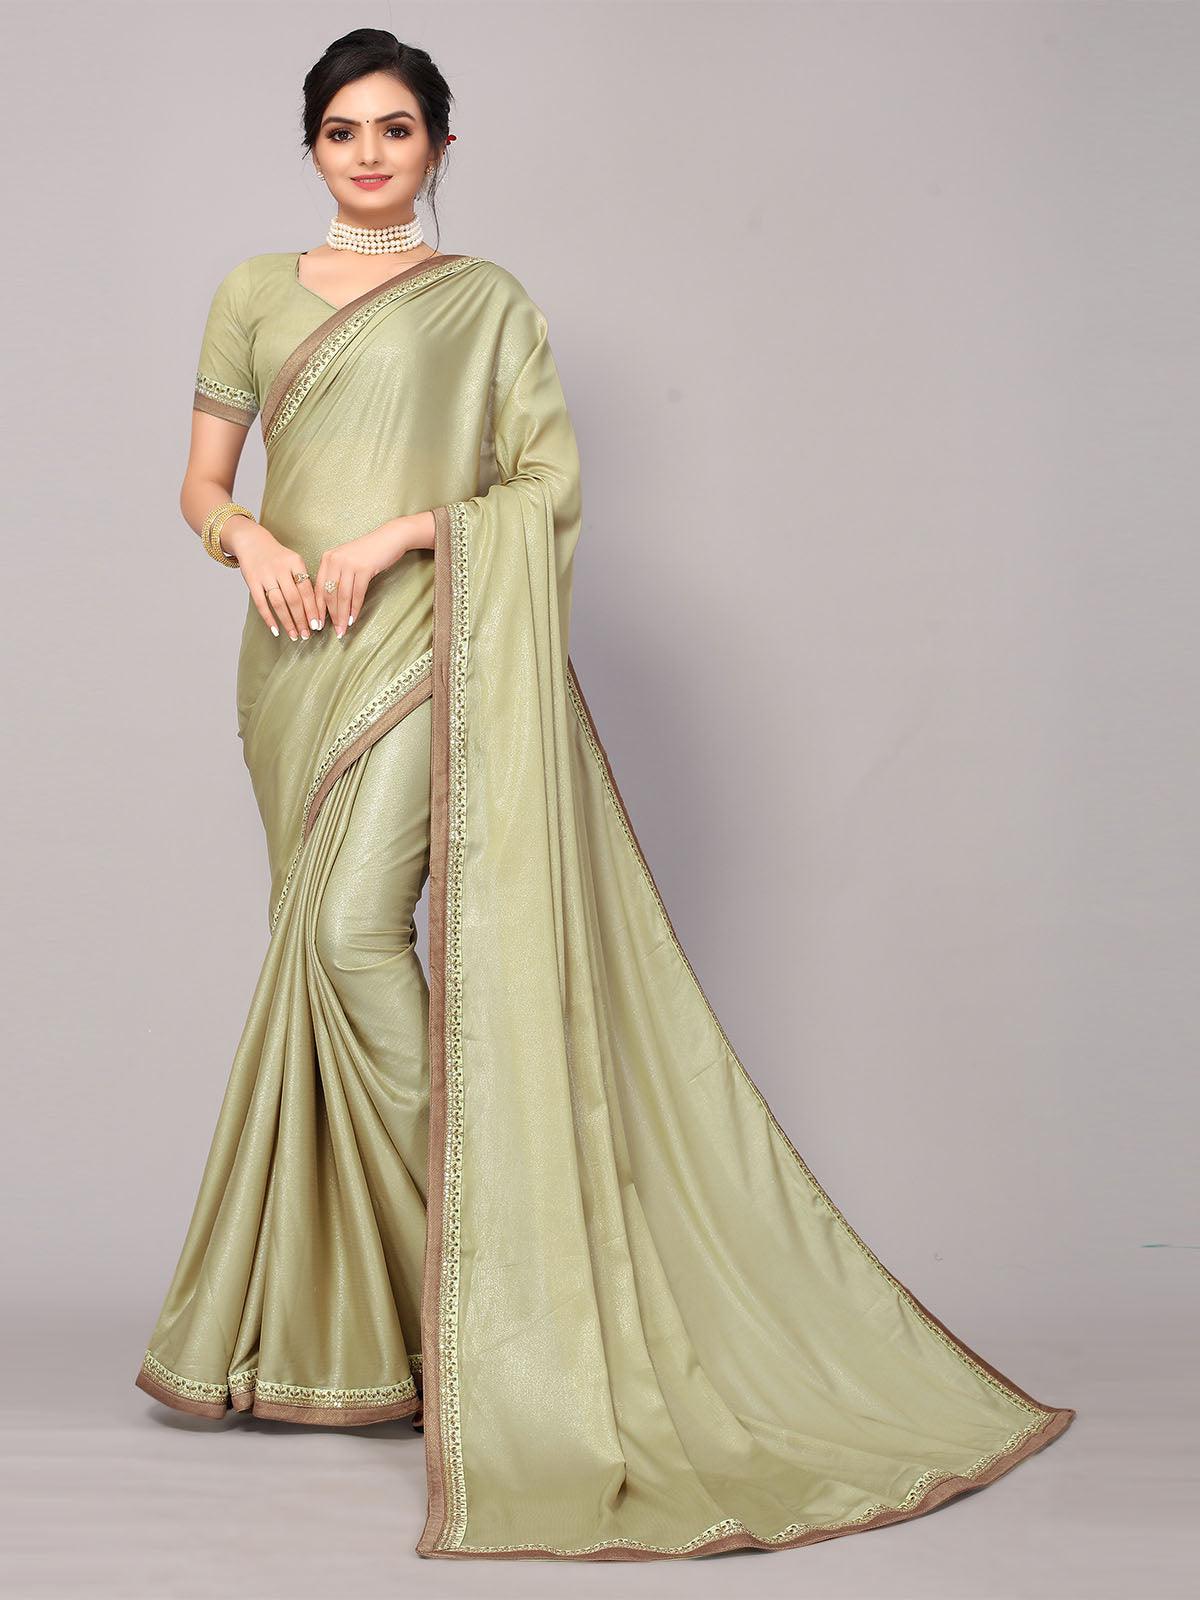 Women's Light Green Poly Silk Embroidery Border Work Saree With Blouse - Odette